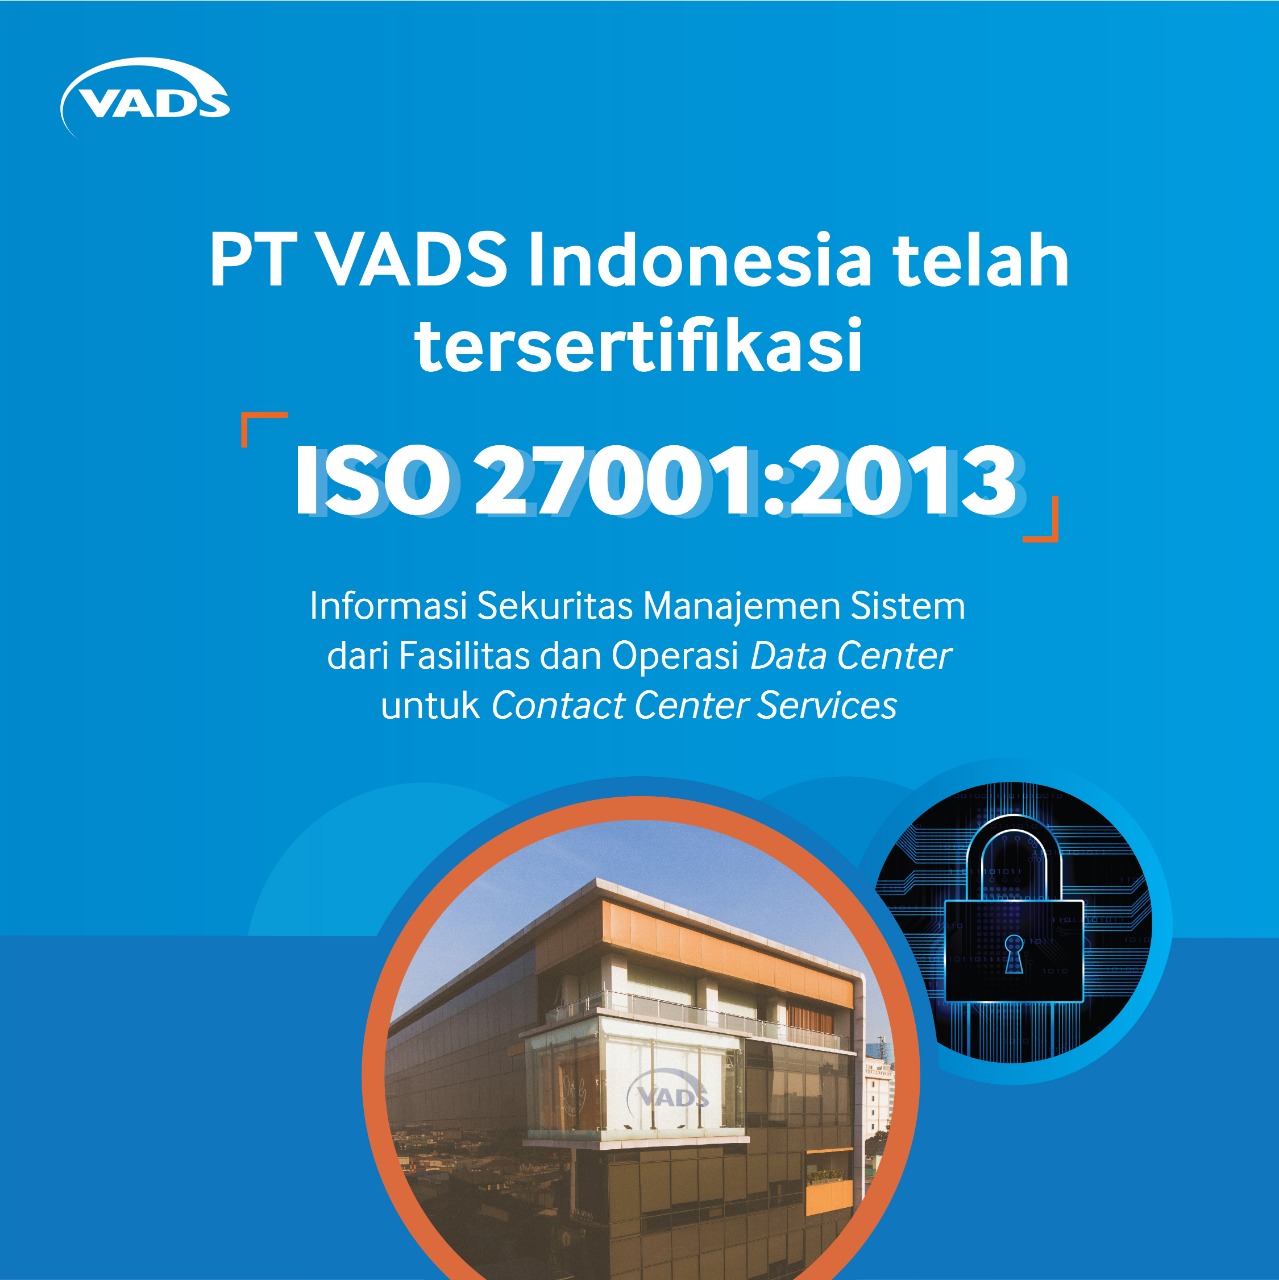 Image of VADS Indonesia Get 27001:2013 Certificate